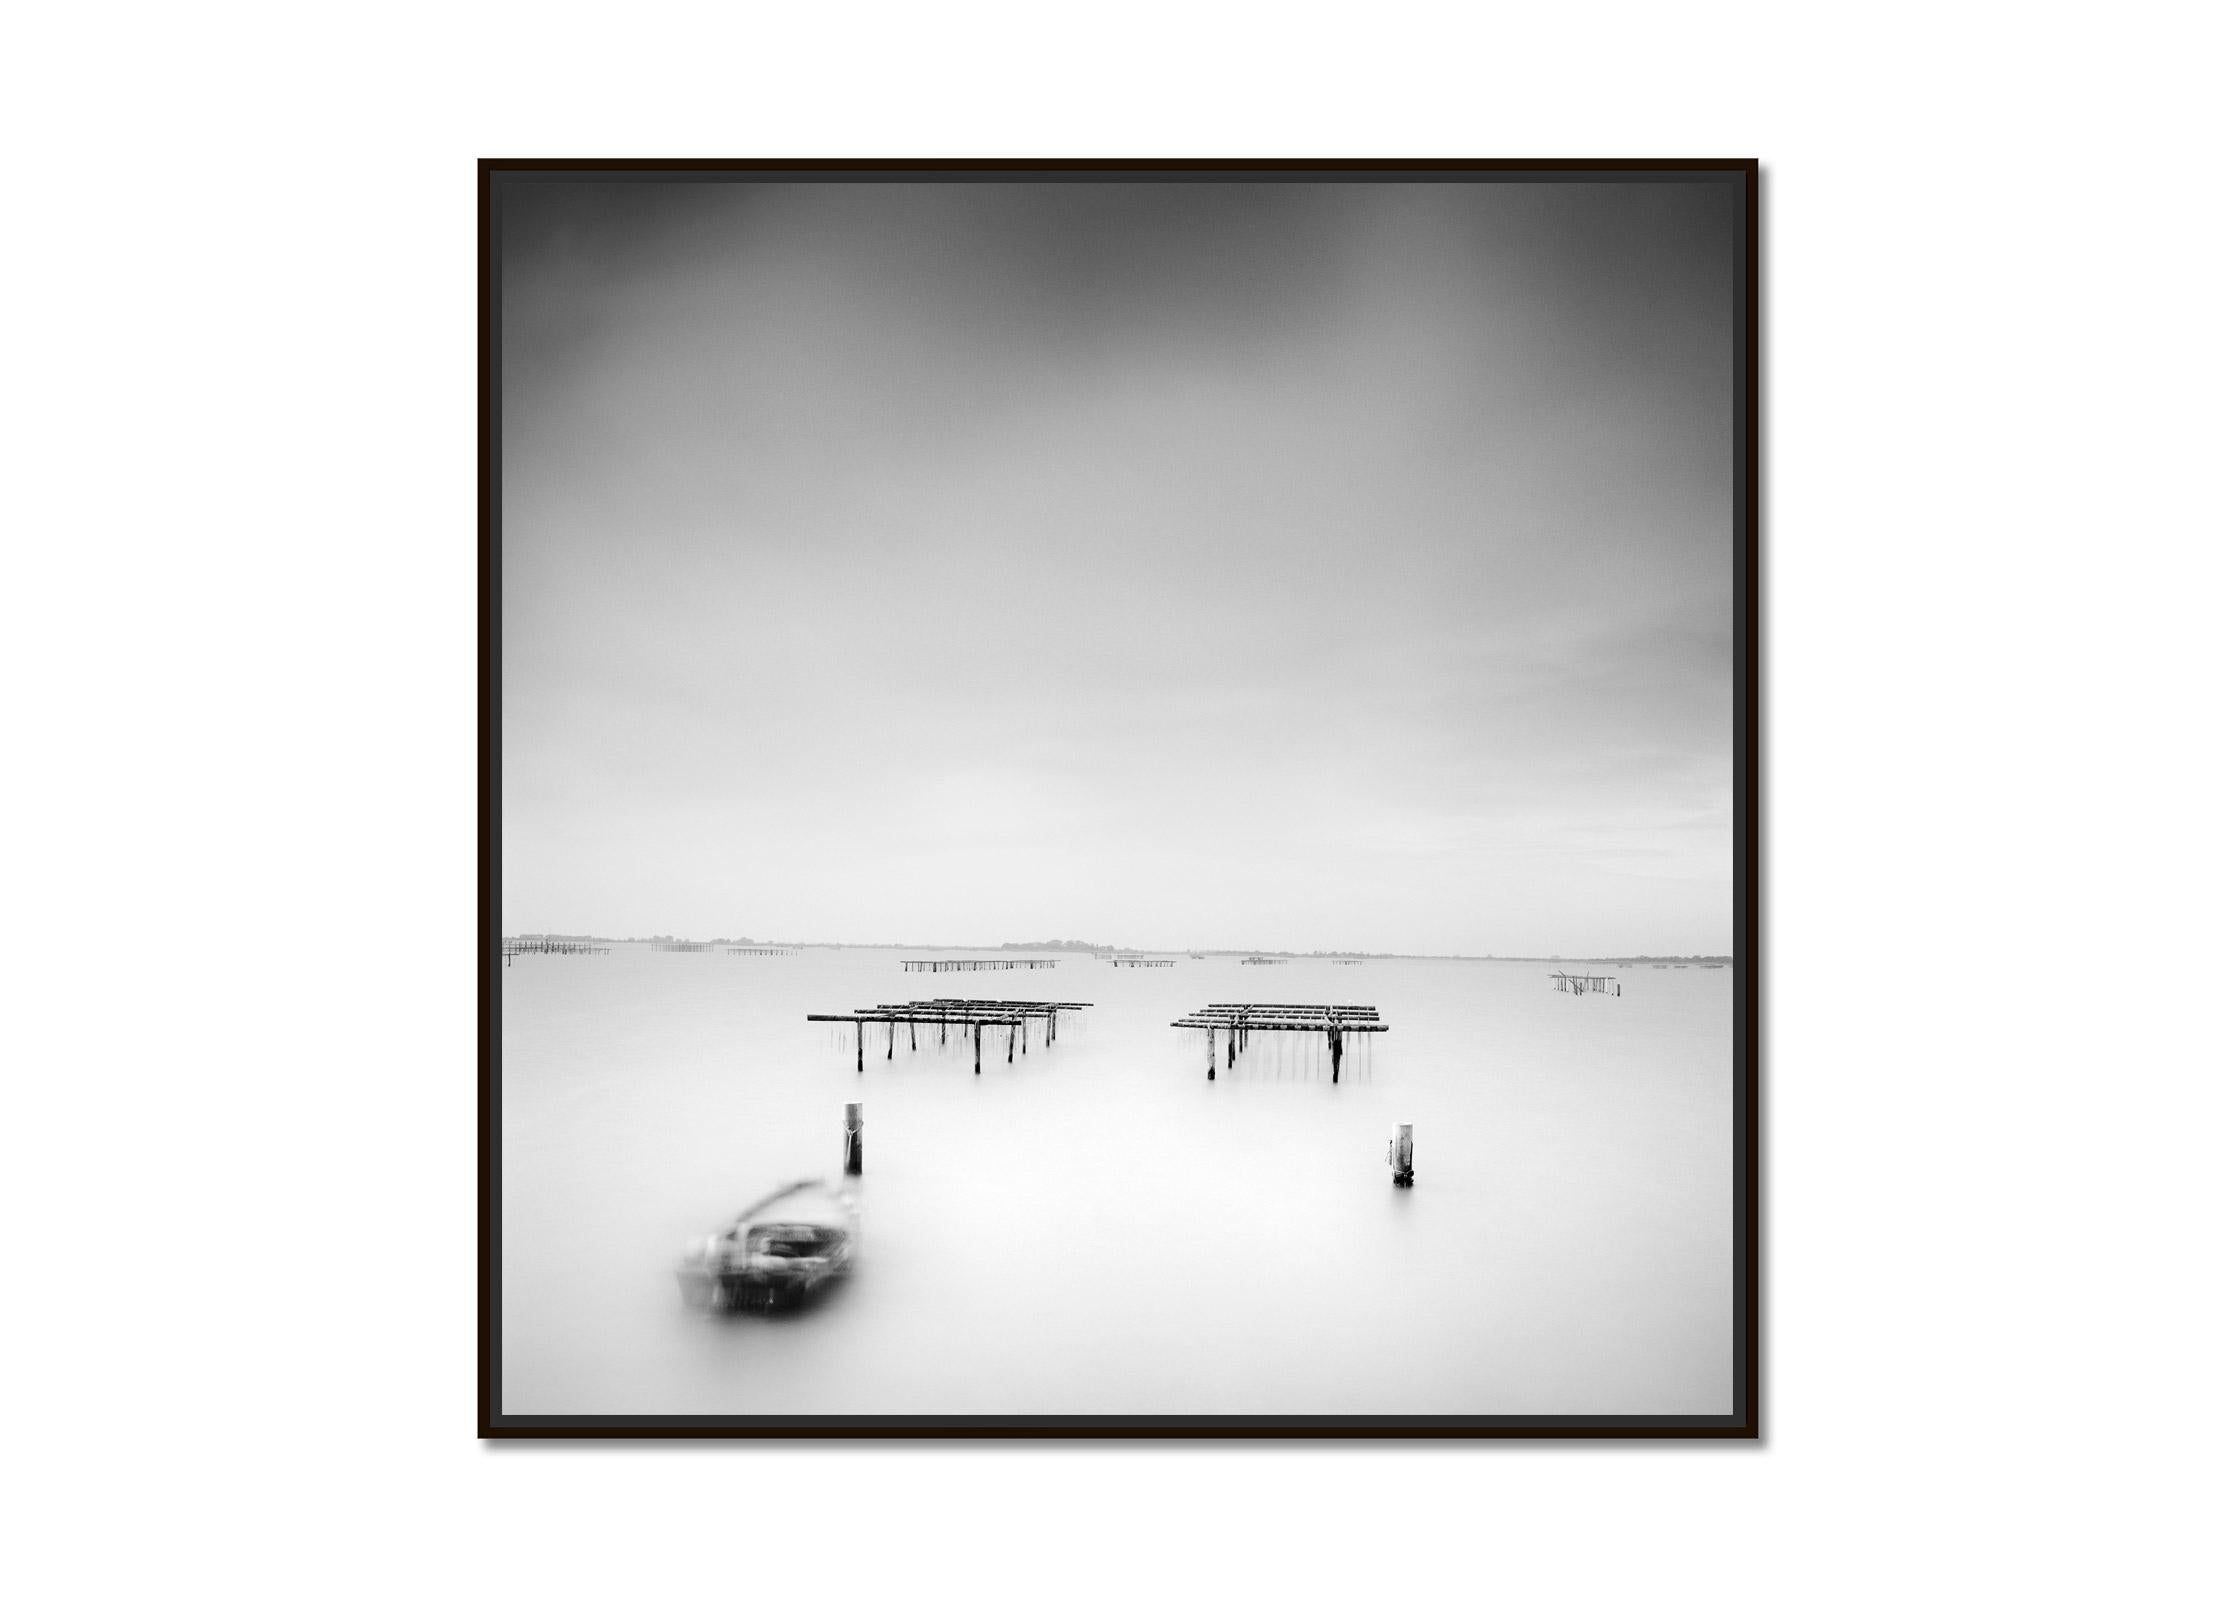 Aquaculture Structures, Italy, black and white fine photography, landscapes   - Photograph by Gerald Berghammer